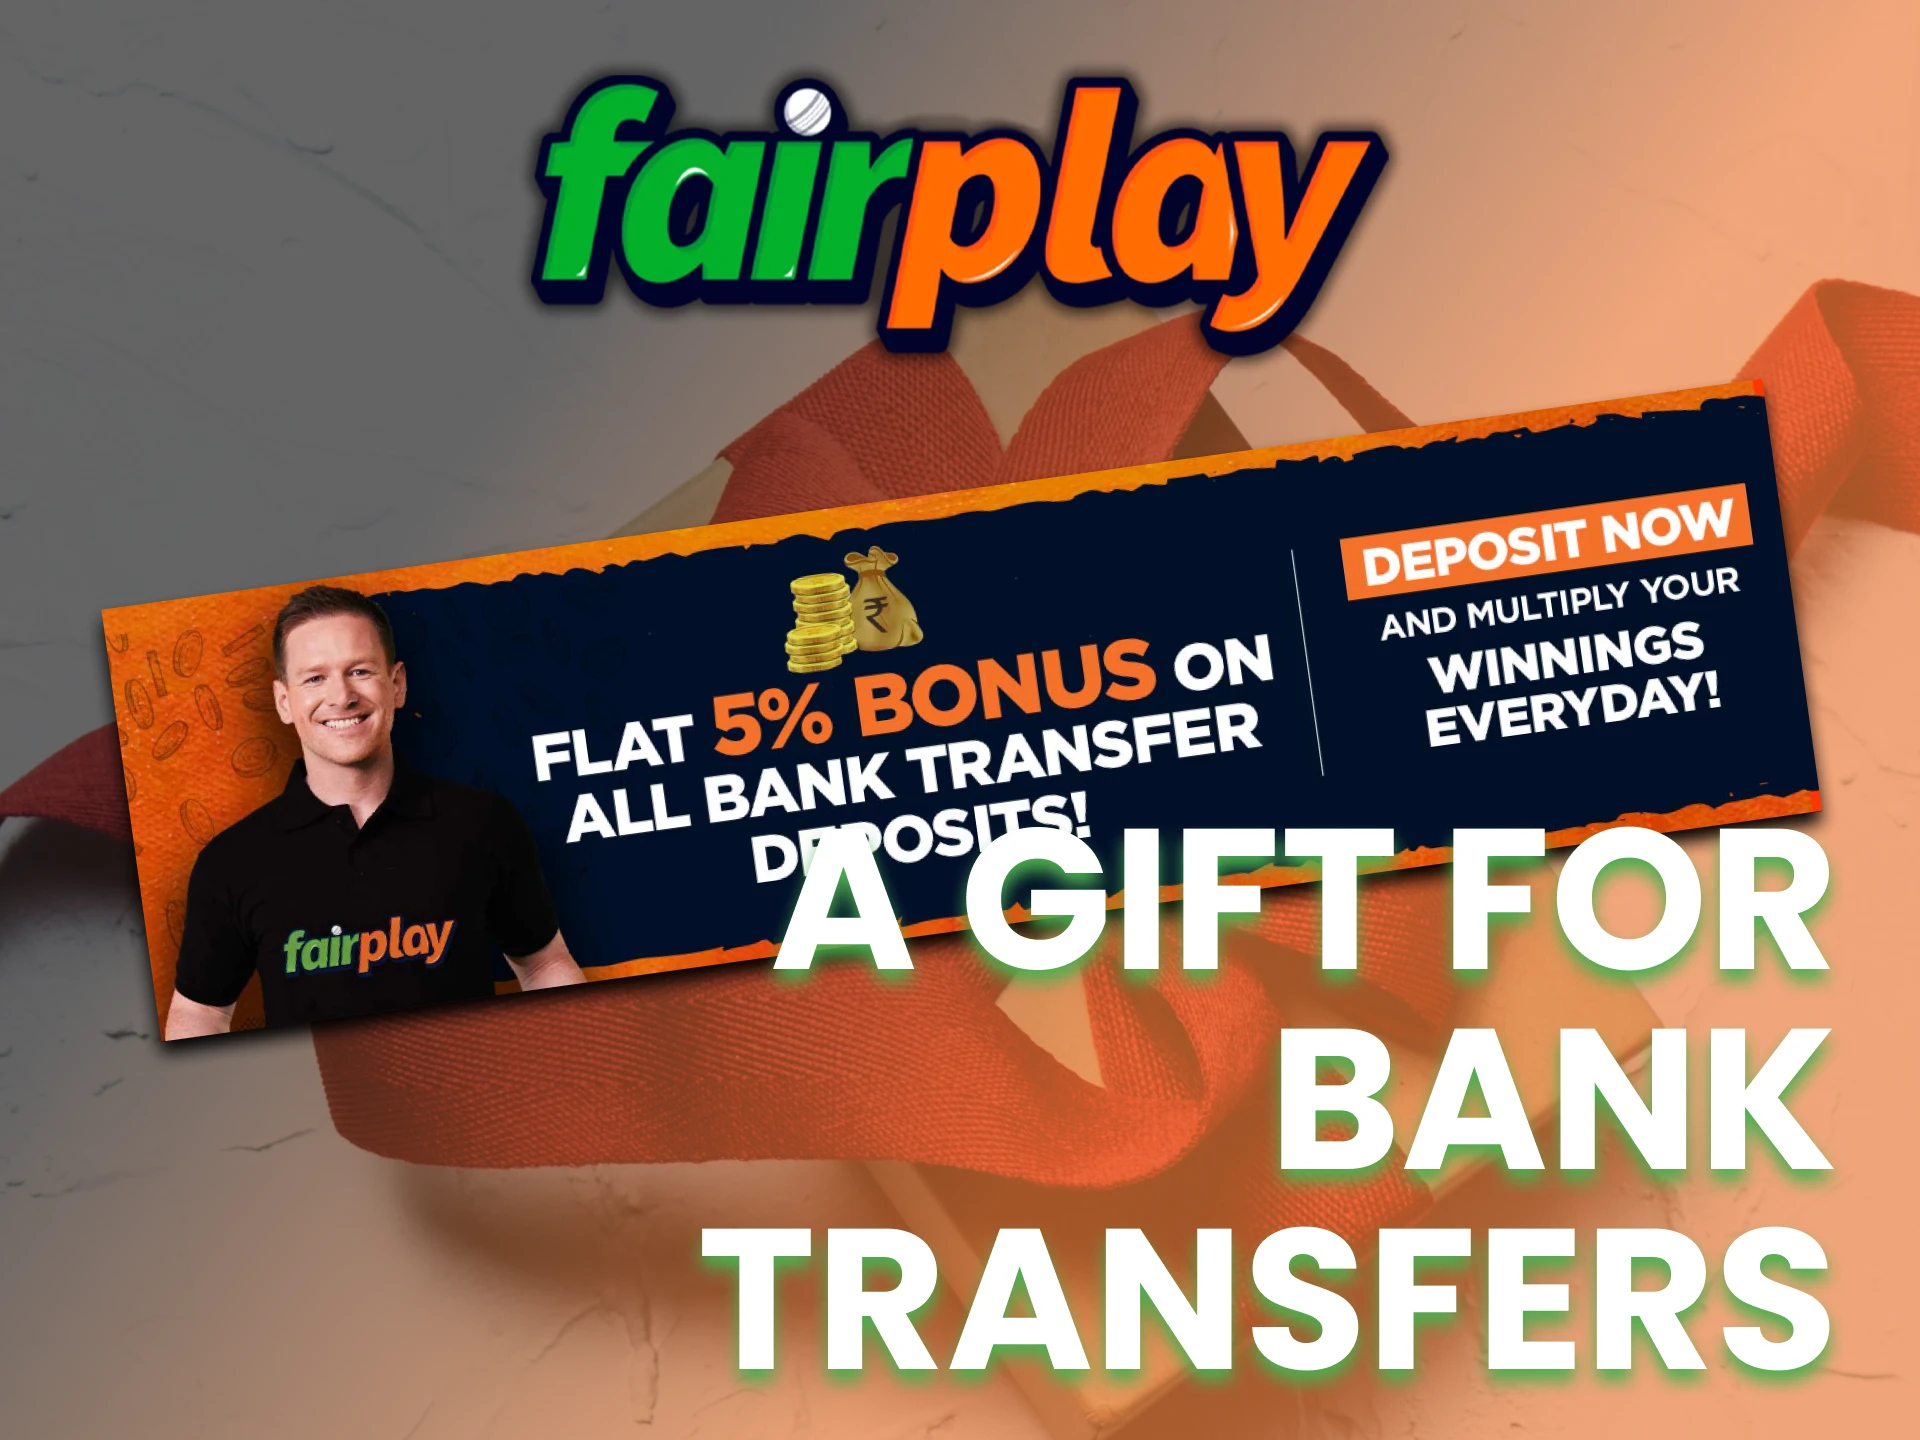 Get additional money when making deposits at Fairplay.